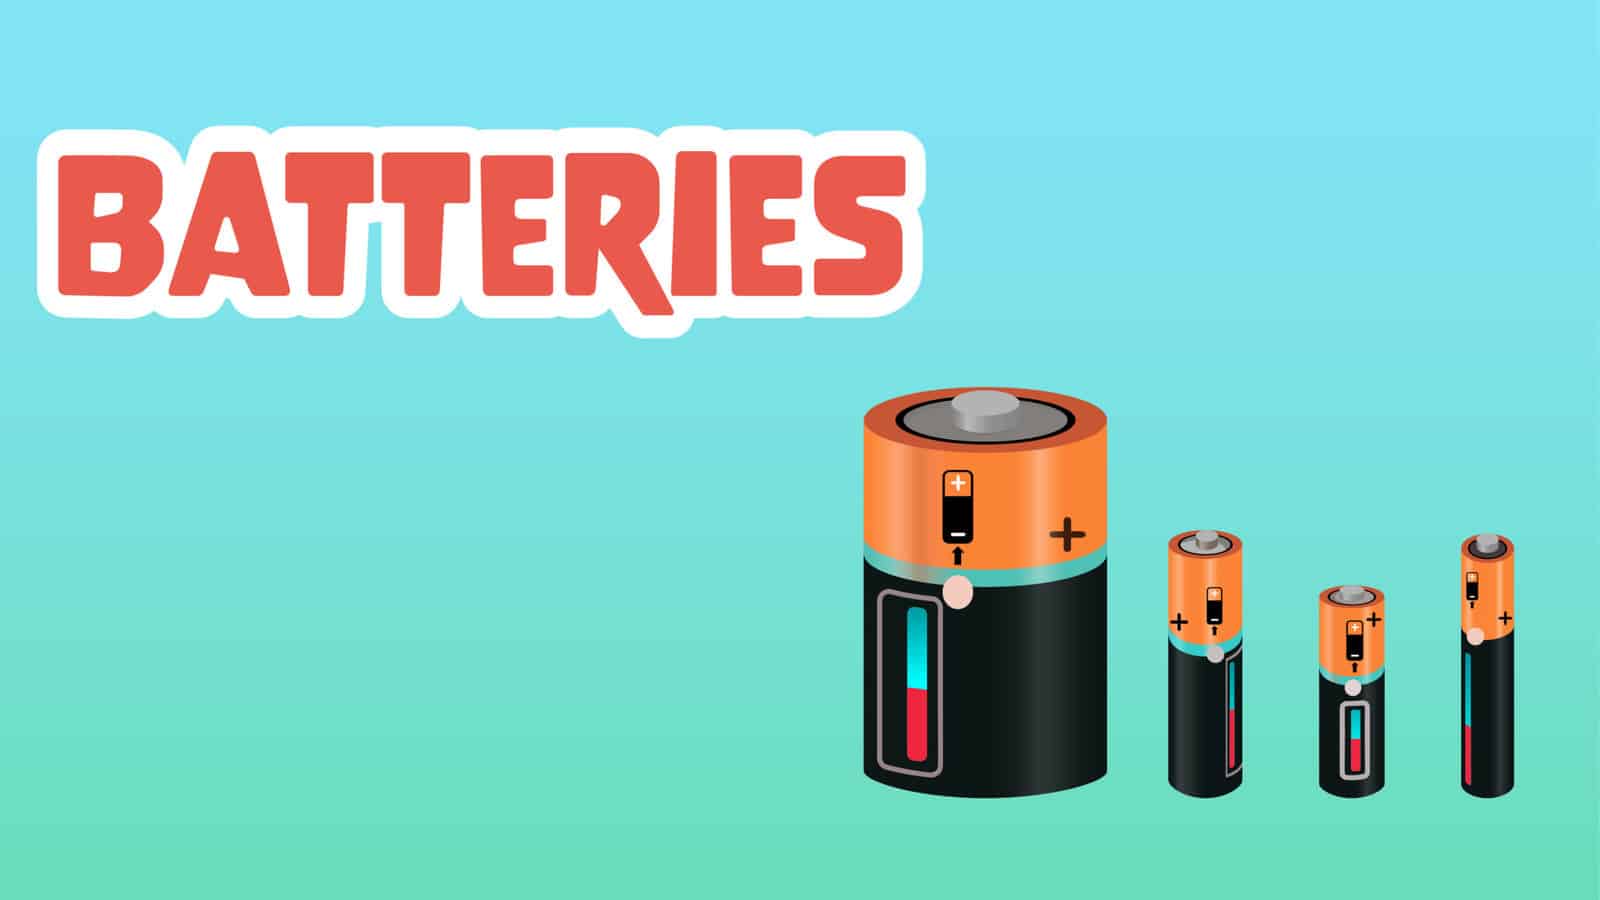 Batteries Facts for Kids – 5 Brilliant Facts about Batteries